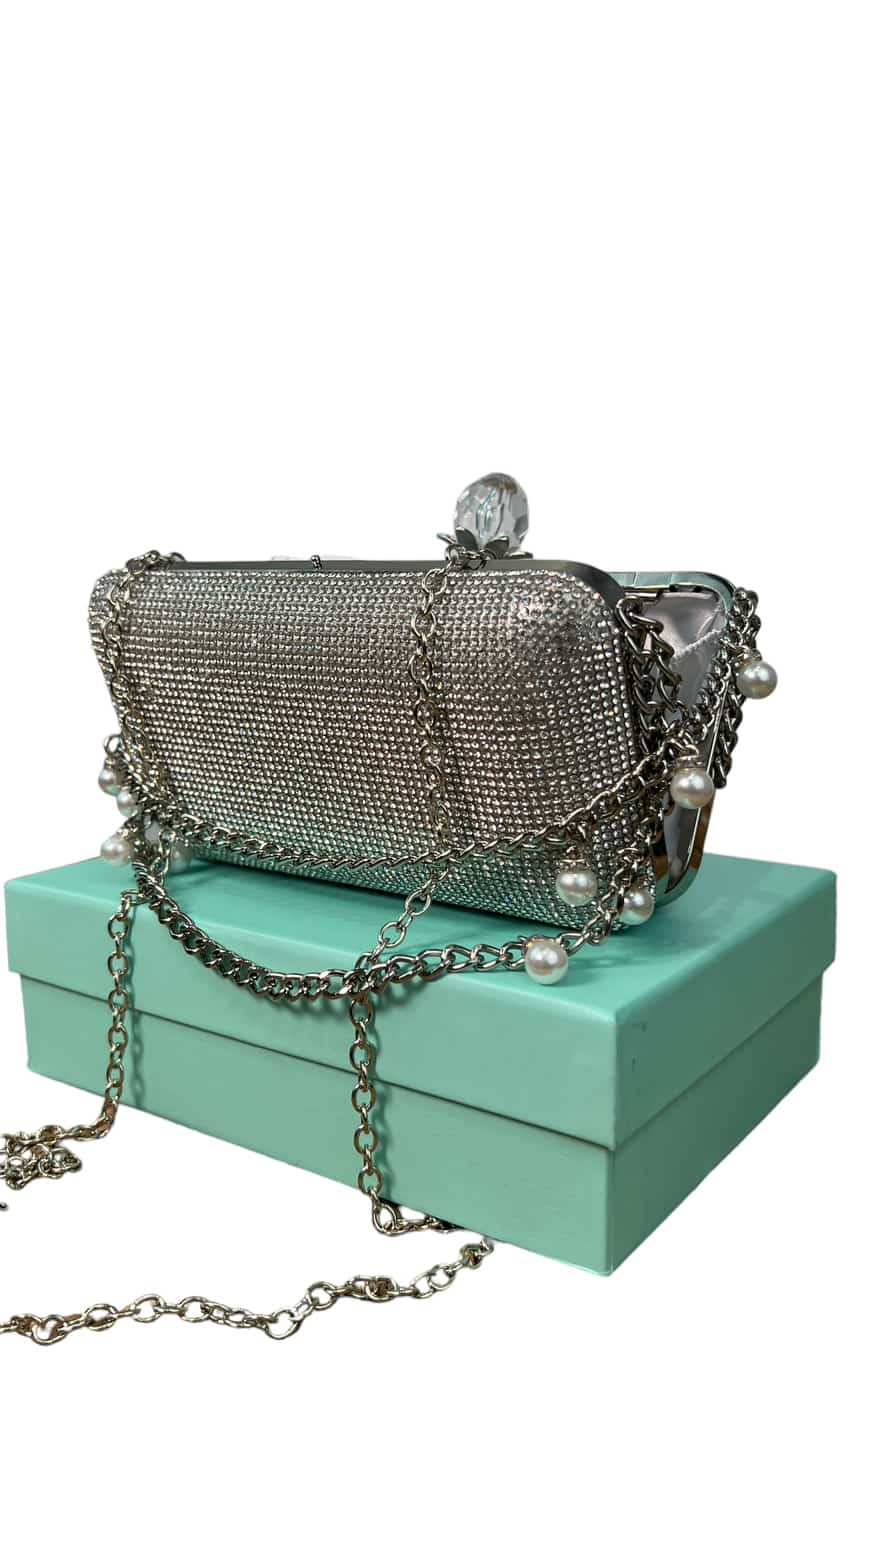 CHRISBELLA SILVER DOUBLE-HANDLE PEARL EMBELLISHED CLUTCH PURSE